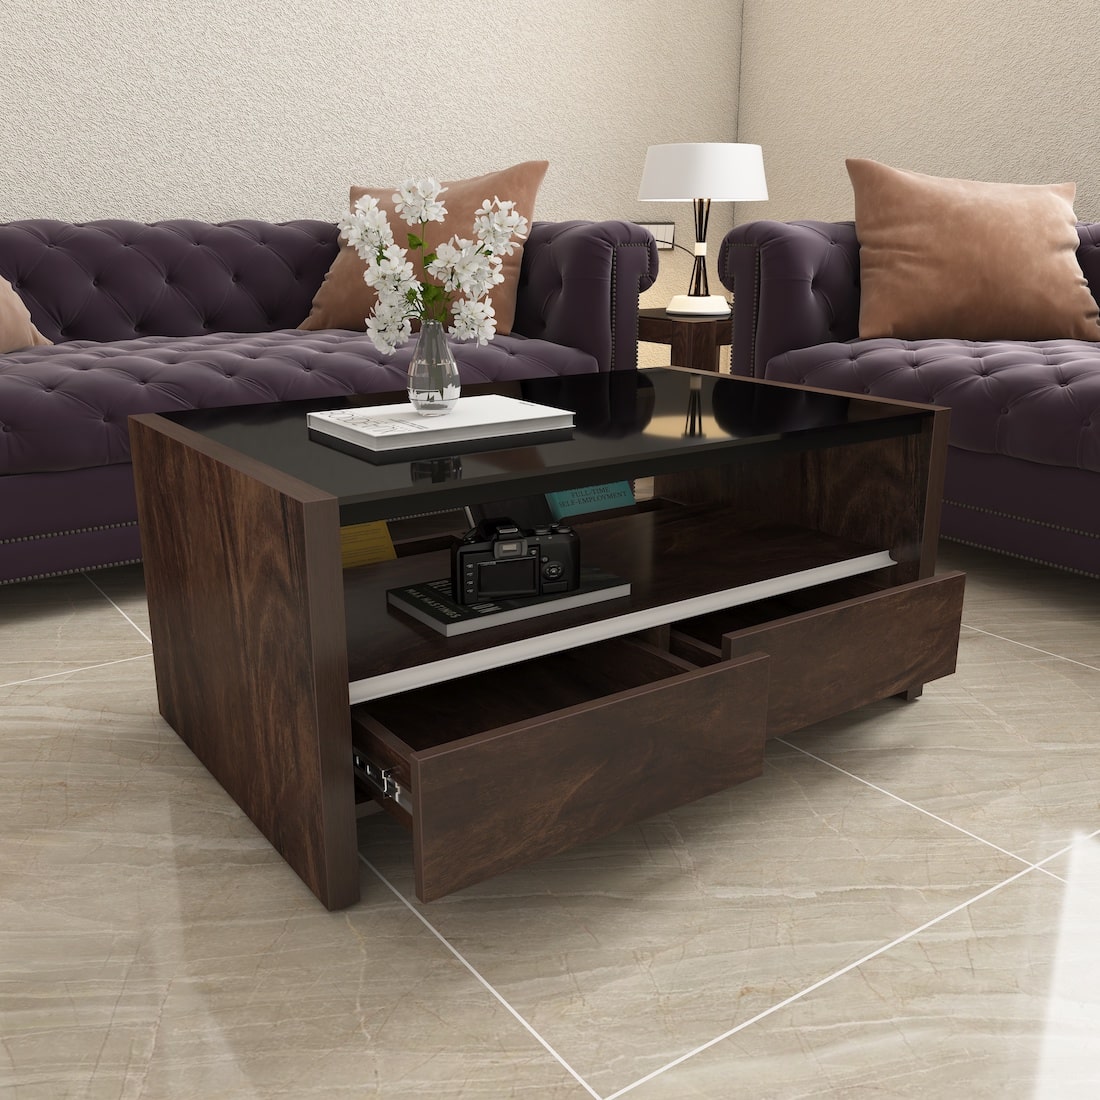 Jazz Compact Coffee Center Table with Drawers